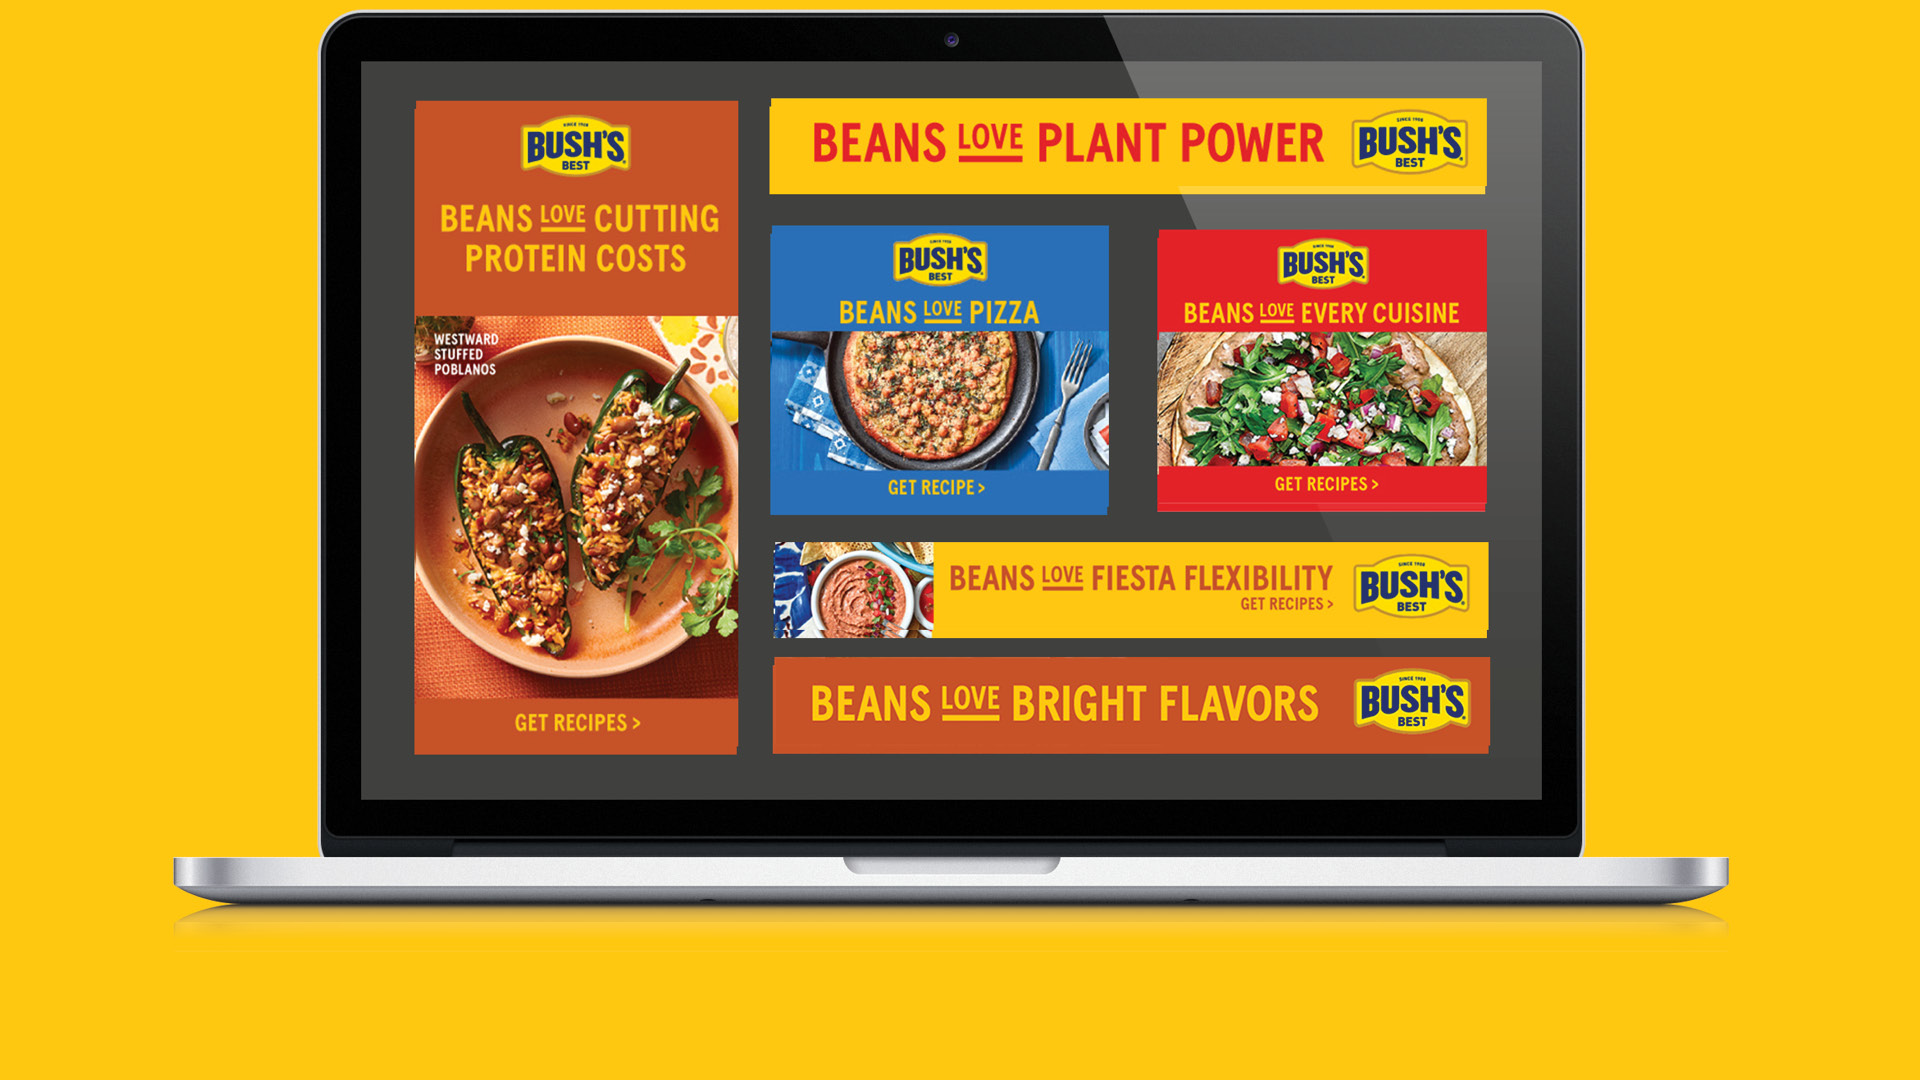 Beans love digital ads on a laptop screen with a yellow background.